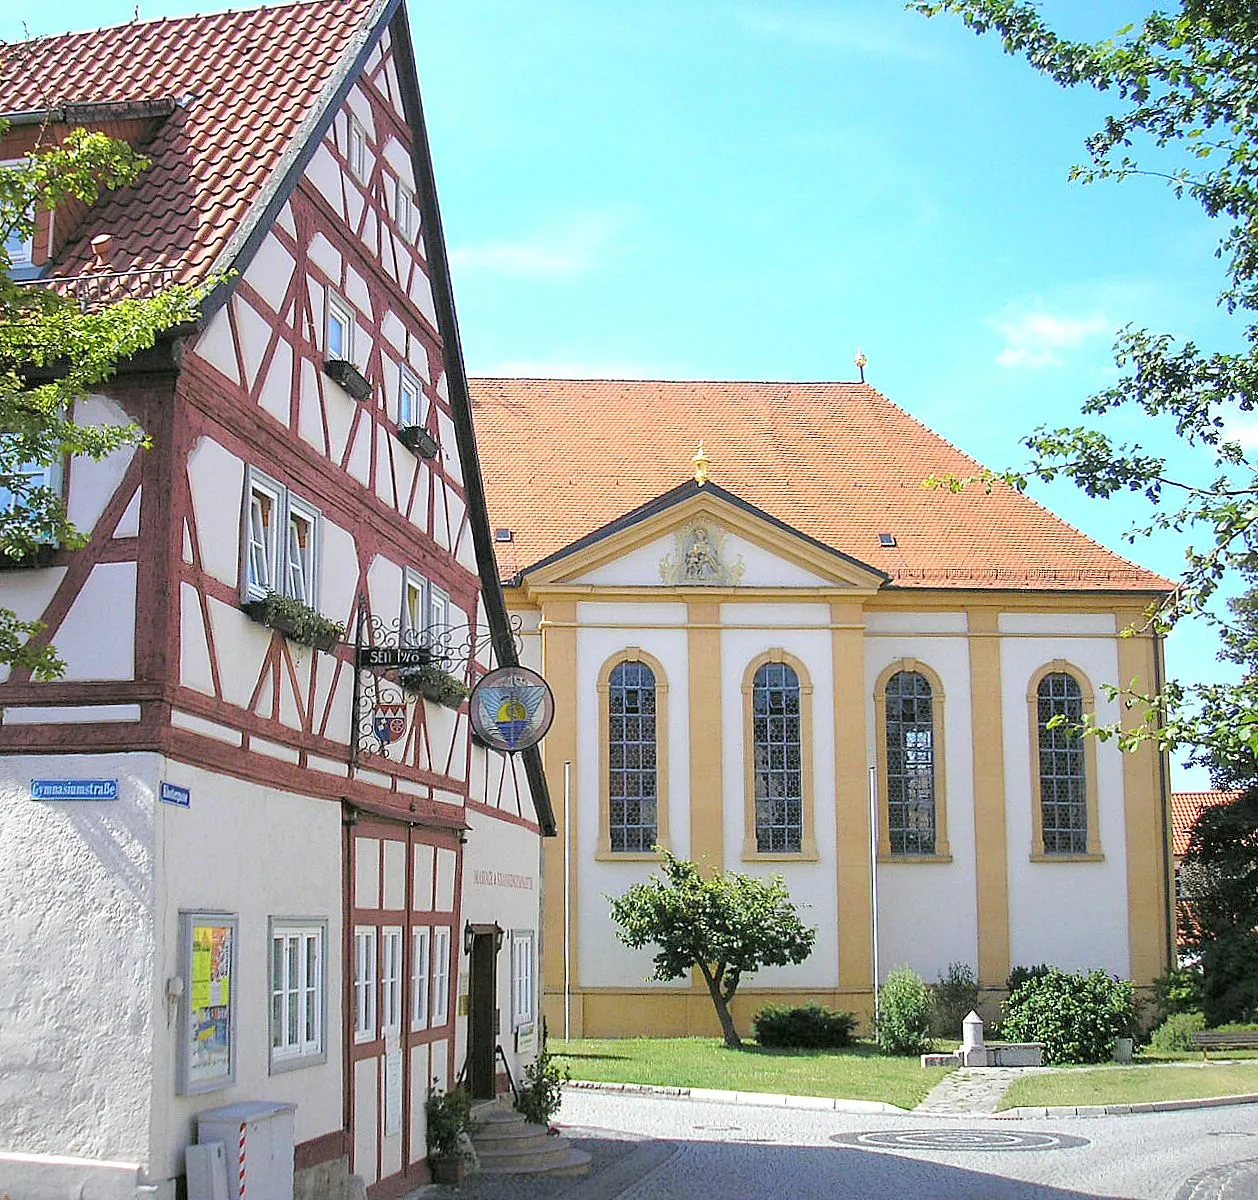 Photo showing: Münnerstadt (Landkreis Bad Kissingen, Lower Franconia, Germany). Abbey church St. Michael and timber frame building